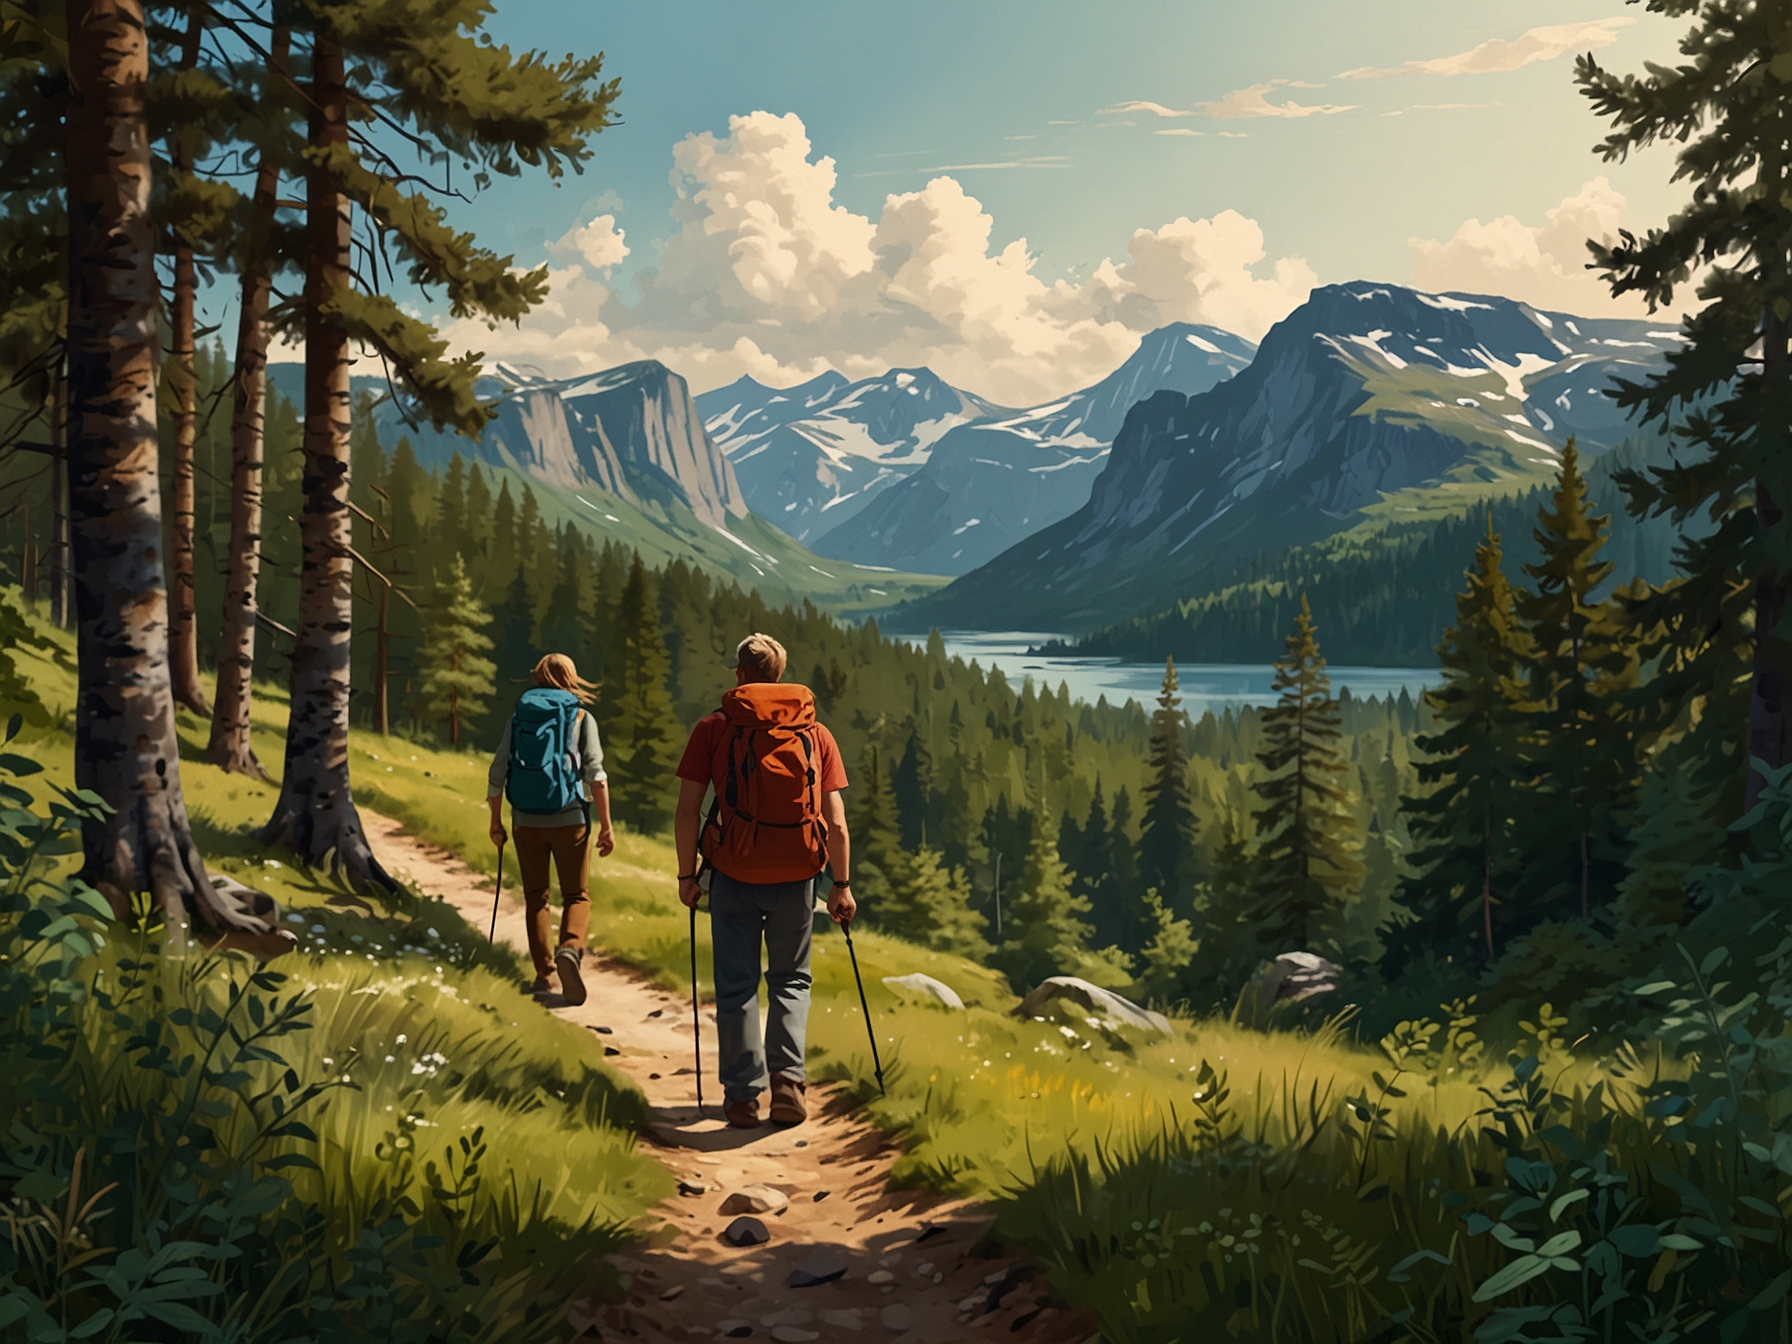 Tourists enjoying a summer hike in the lush forests of Scandinavia, where temperatures are comfortably mild. The image showcases serene landscapes and the vibrant cultural heritage of the region.